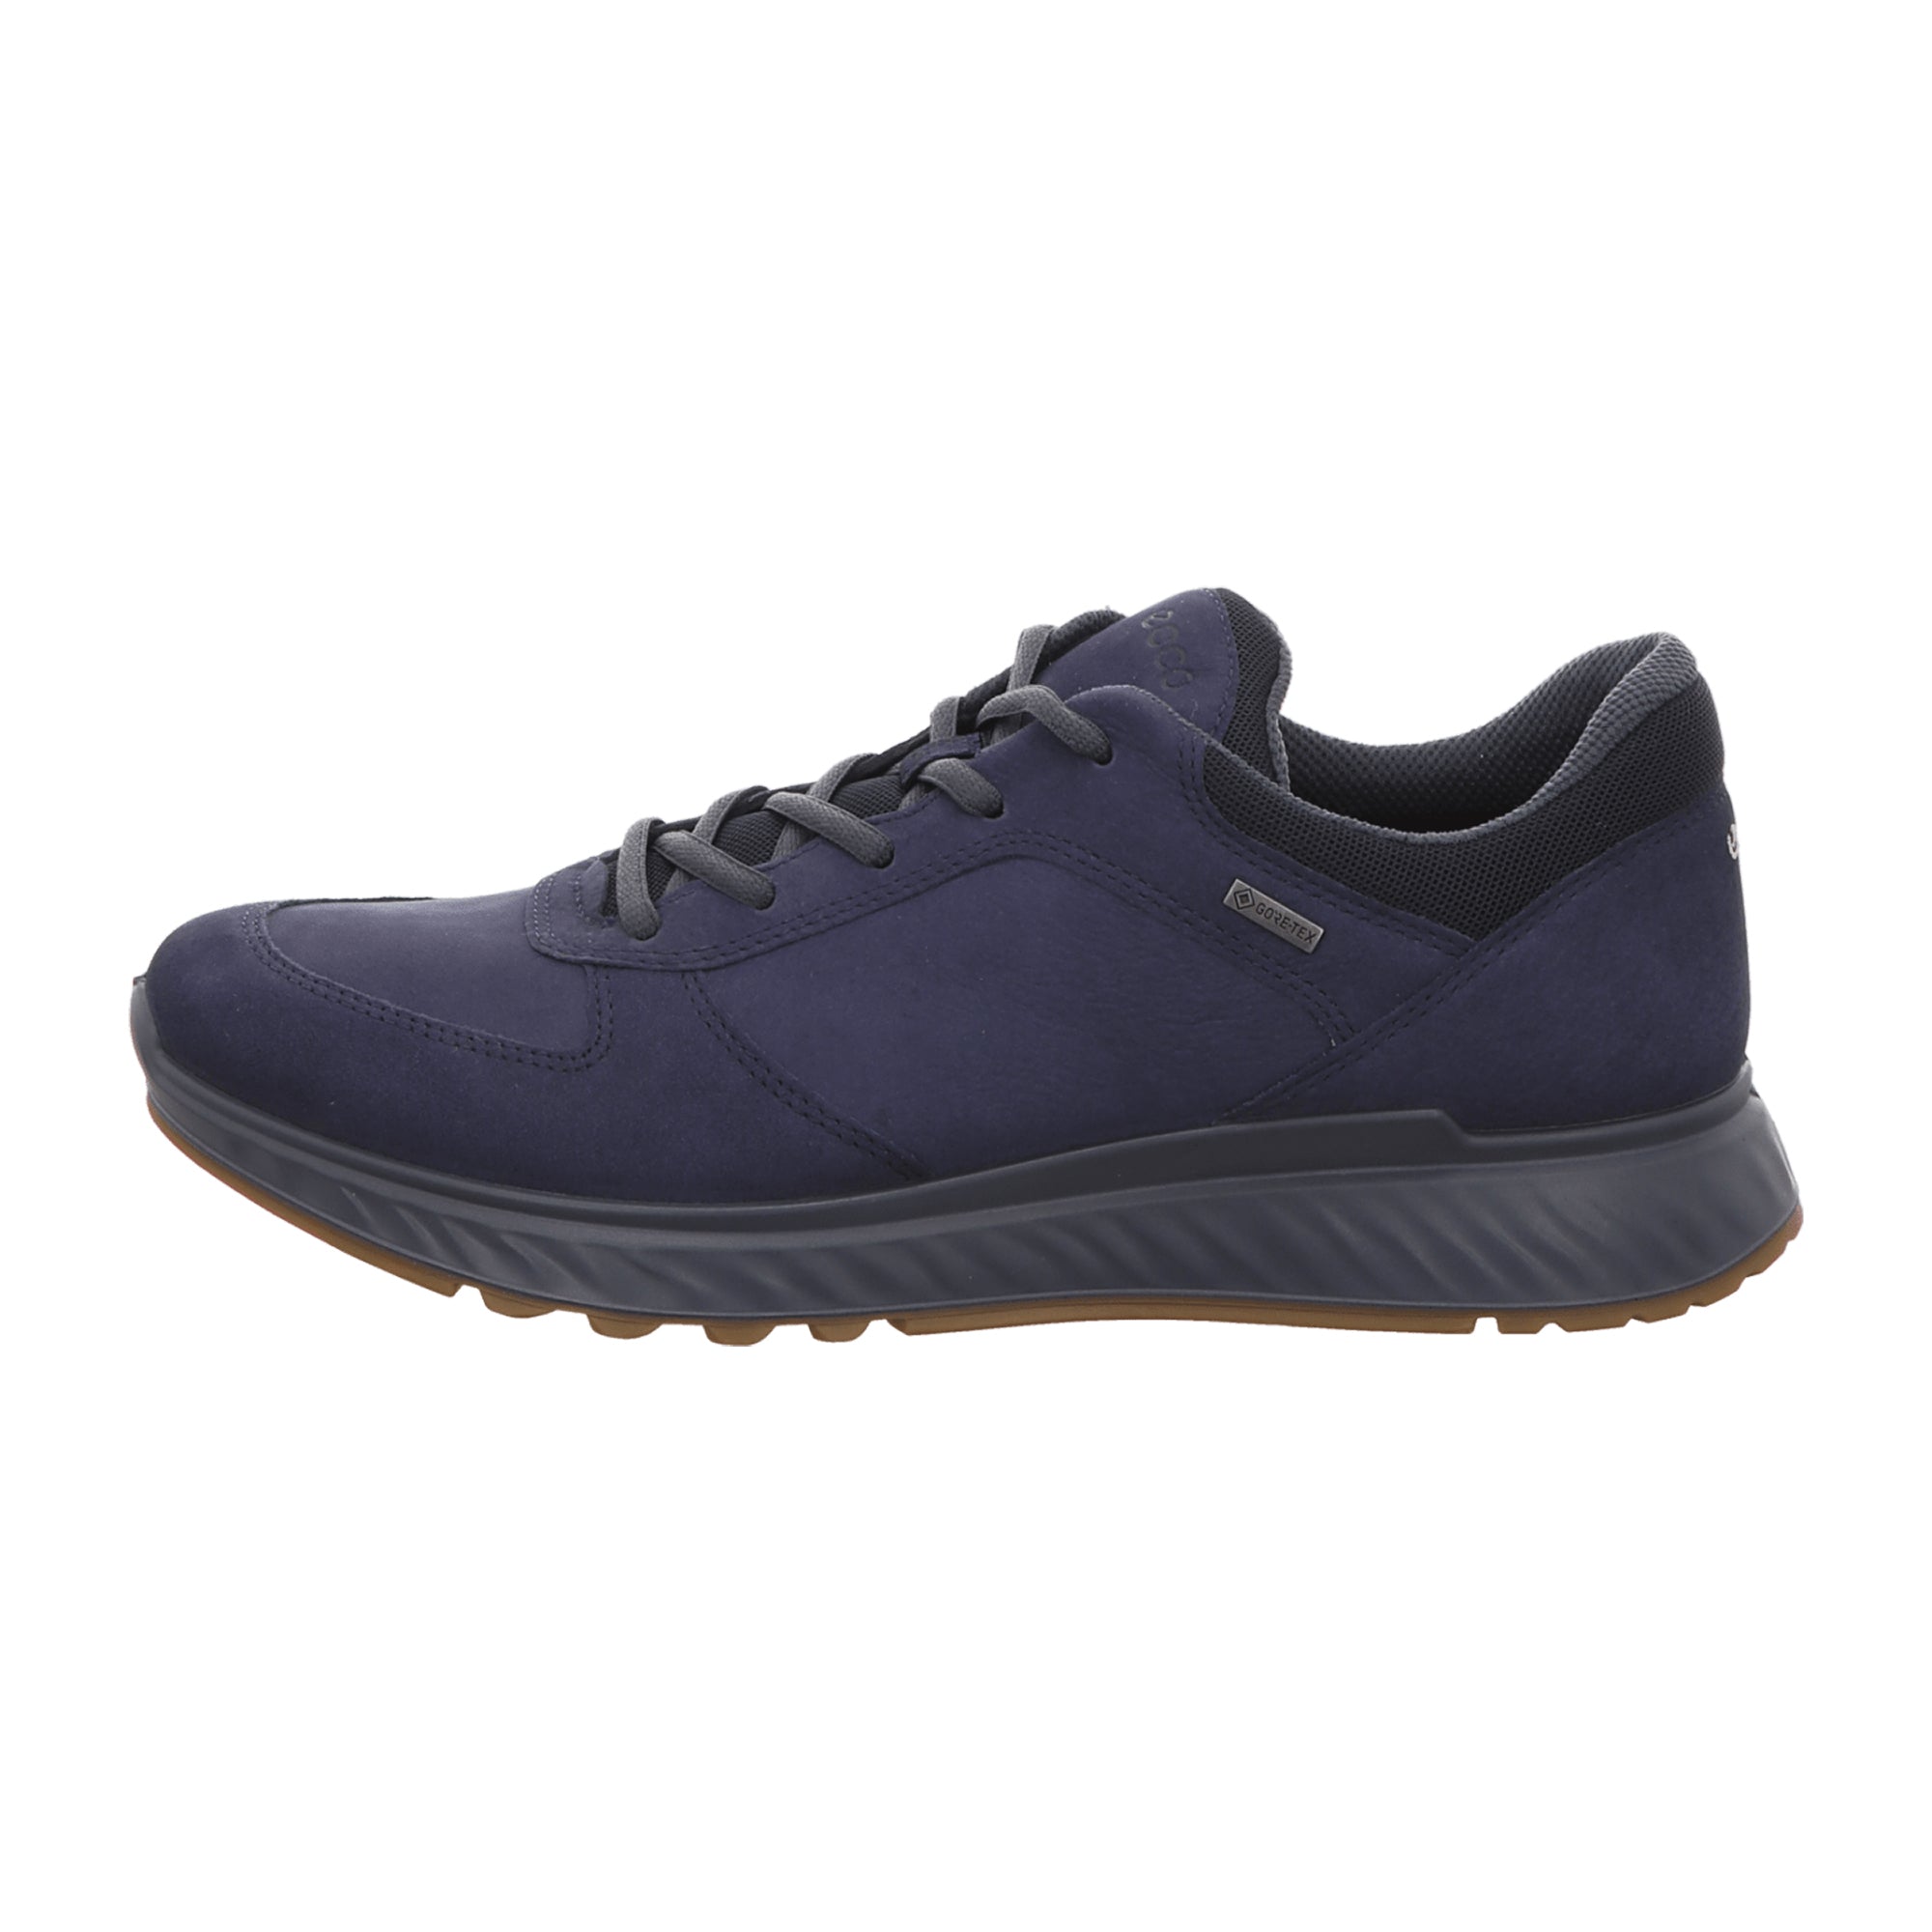 Ecco Men's Outdoor Shoes - Durable & Stylish in Blue